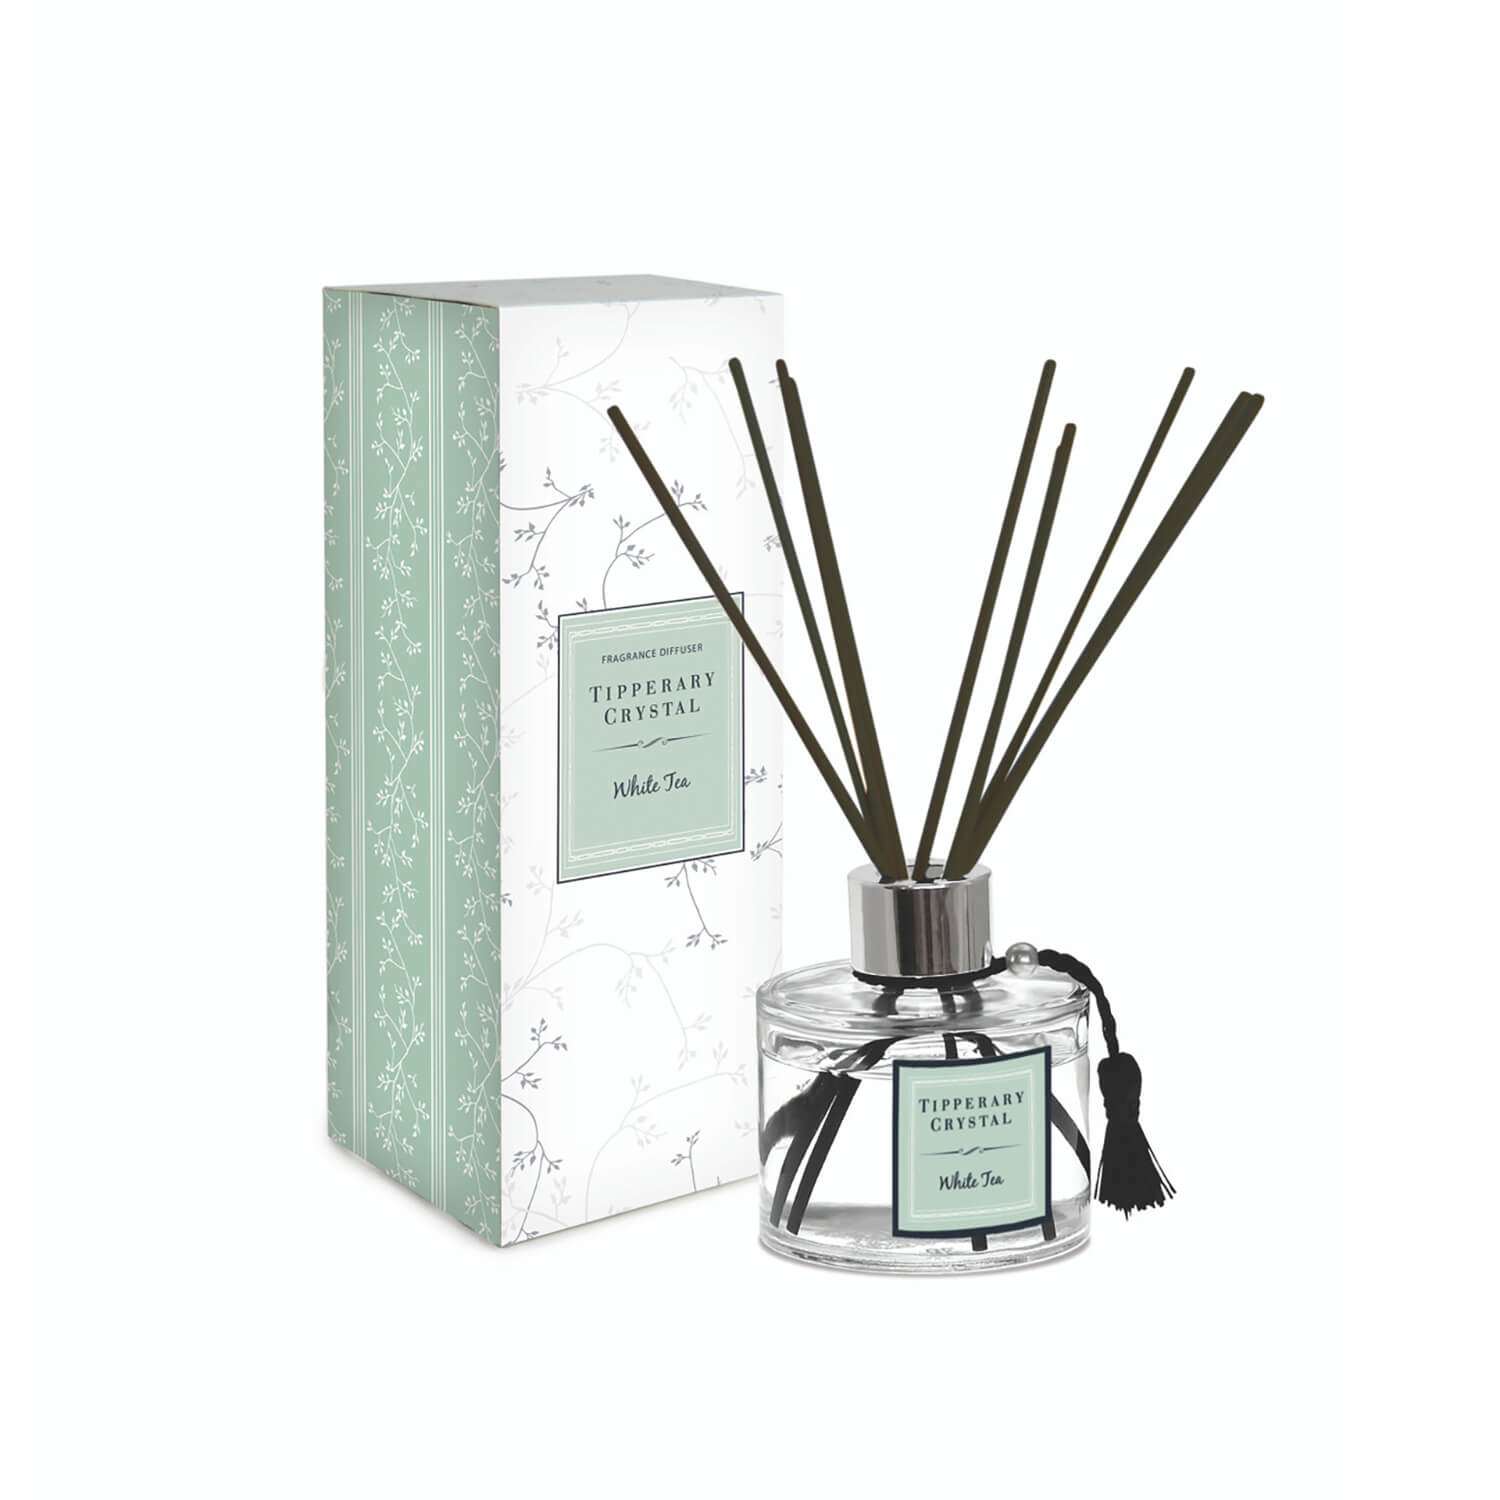 Tipperary Crystal Fragranced Reed Diffuser Set - White Tea 1 Shaws Department Stores